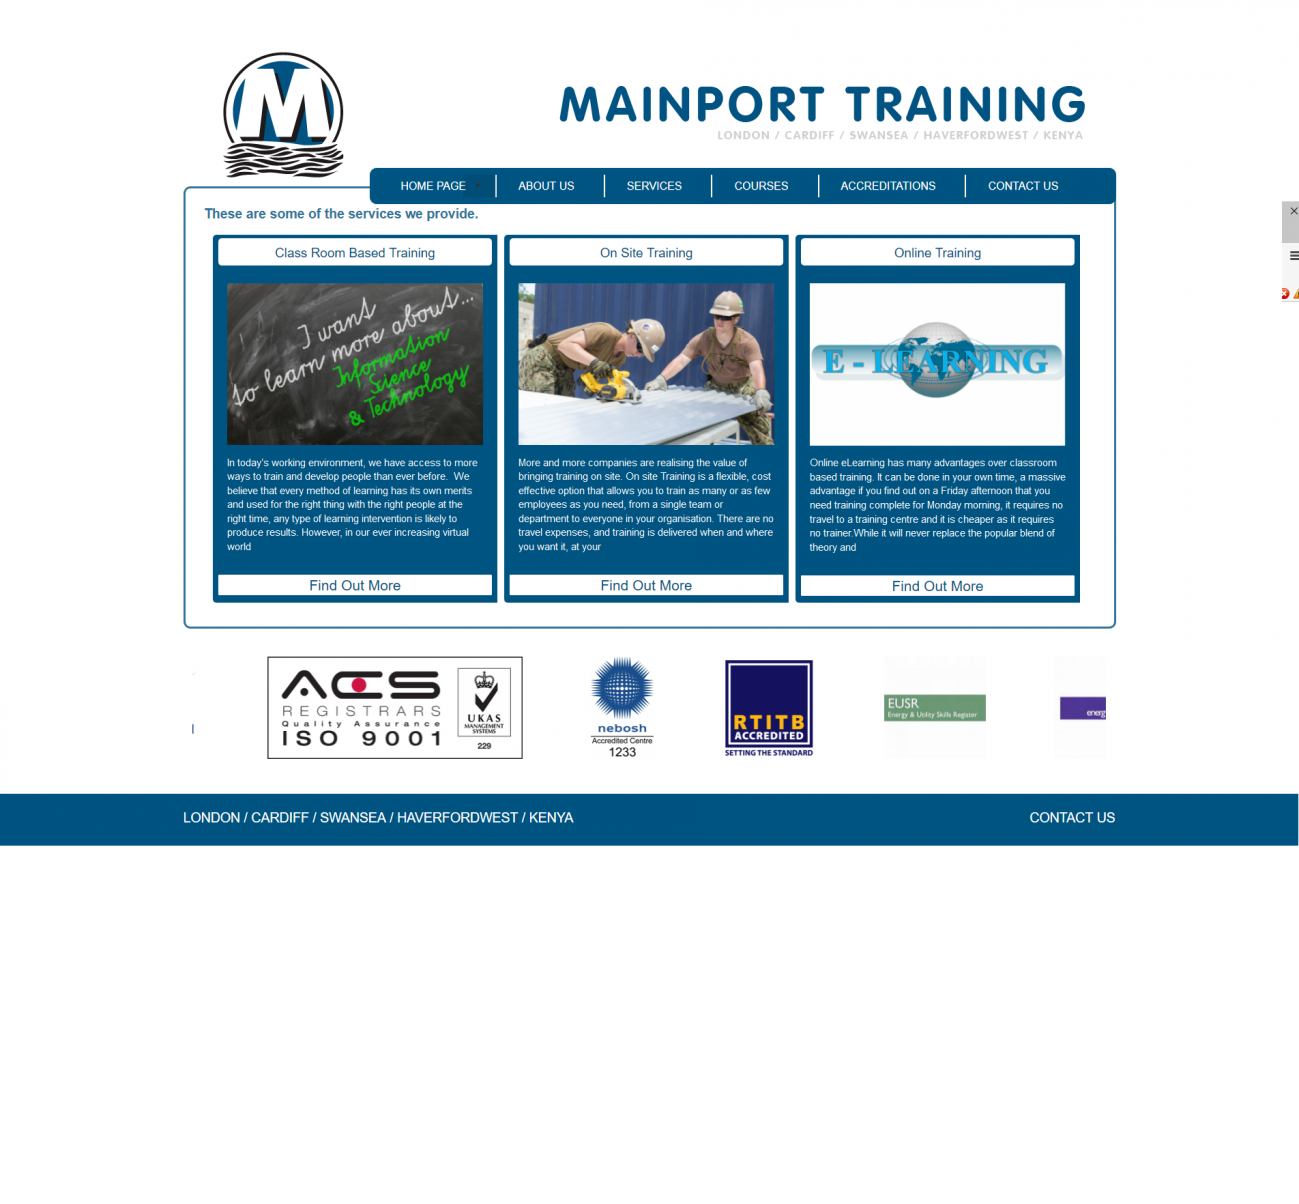 An image from Mainport Training